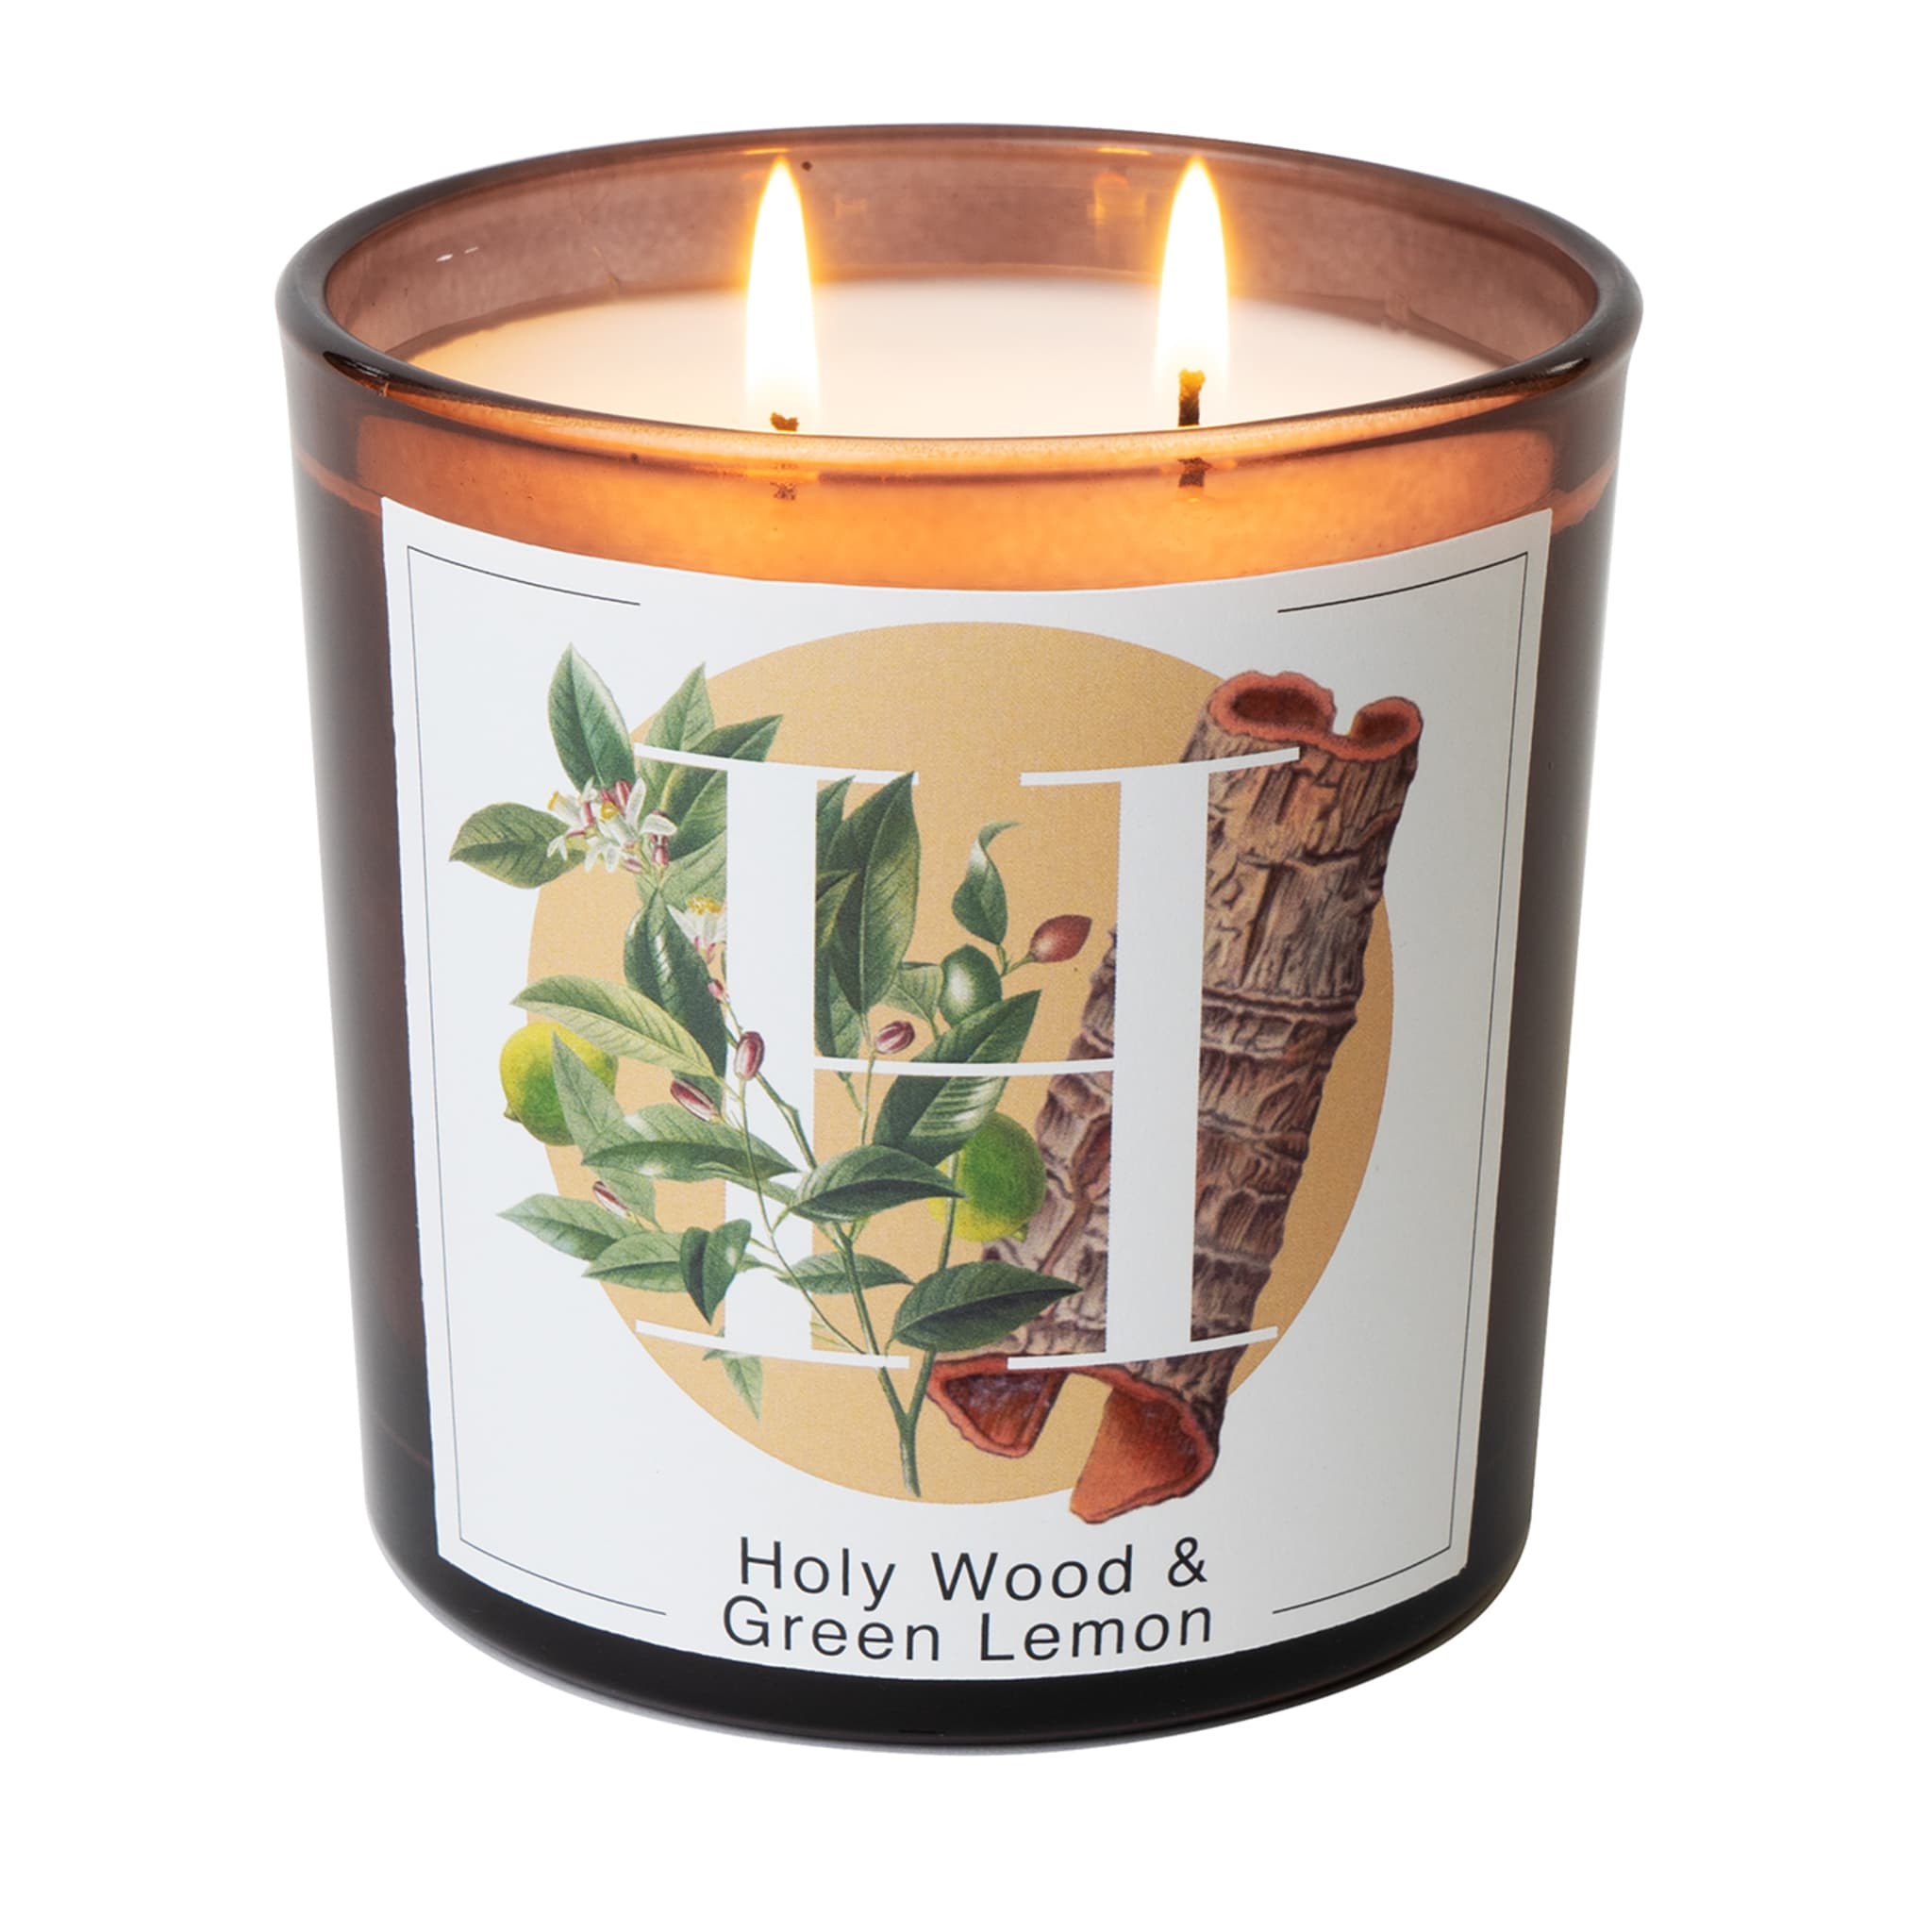 Holy Wood & Green Lemon Set of 2 Scented Candles - Main view